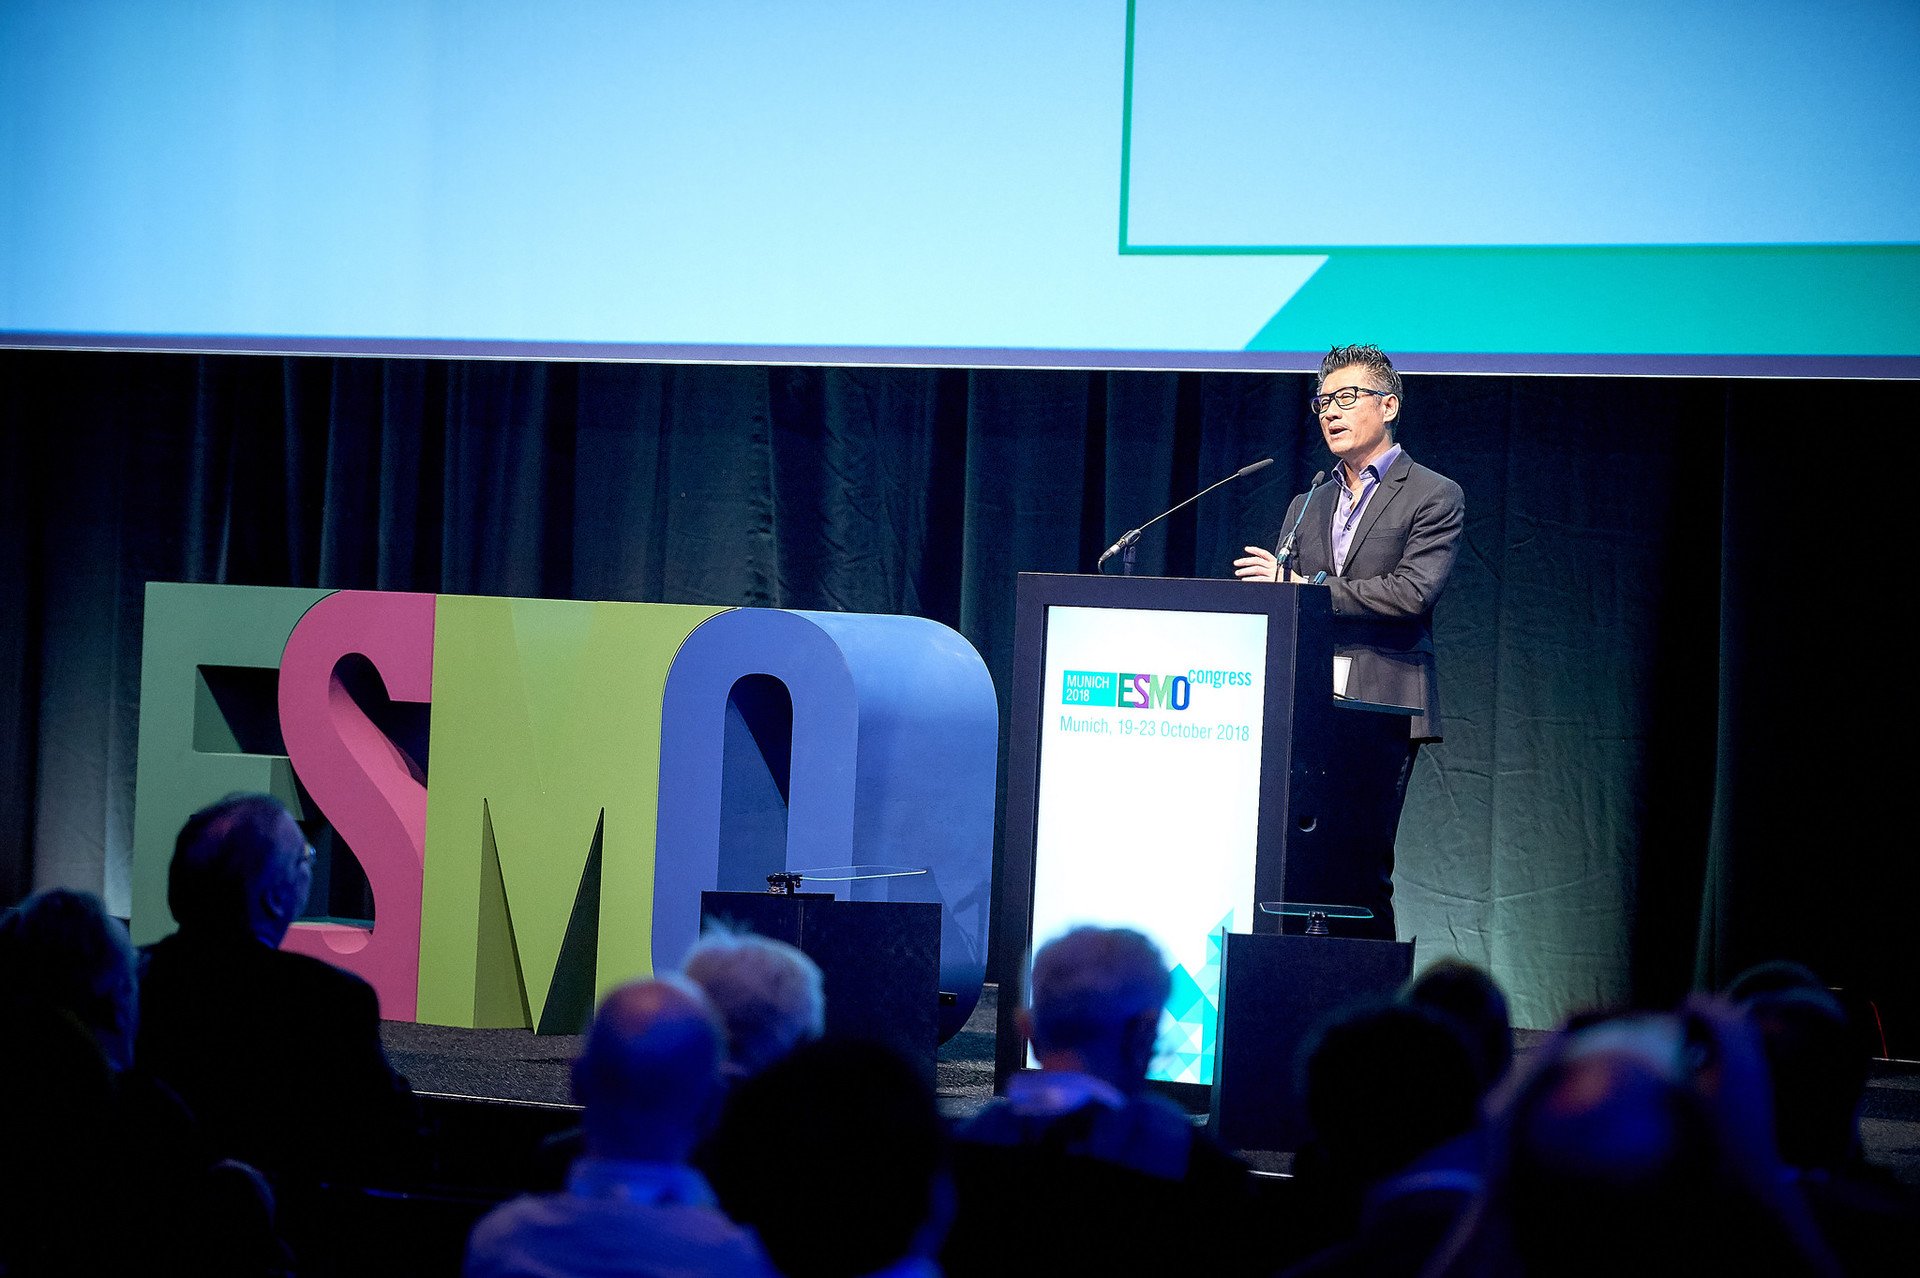 Professor Tony MOK Honoured with the ESMO Lifetime Achievement Award Recognising His Global Leadership in Defining Lung Cancer Treatment Standard